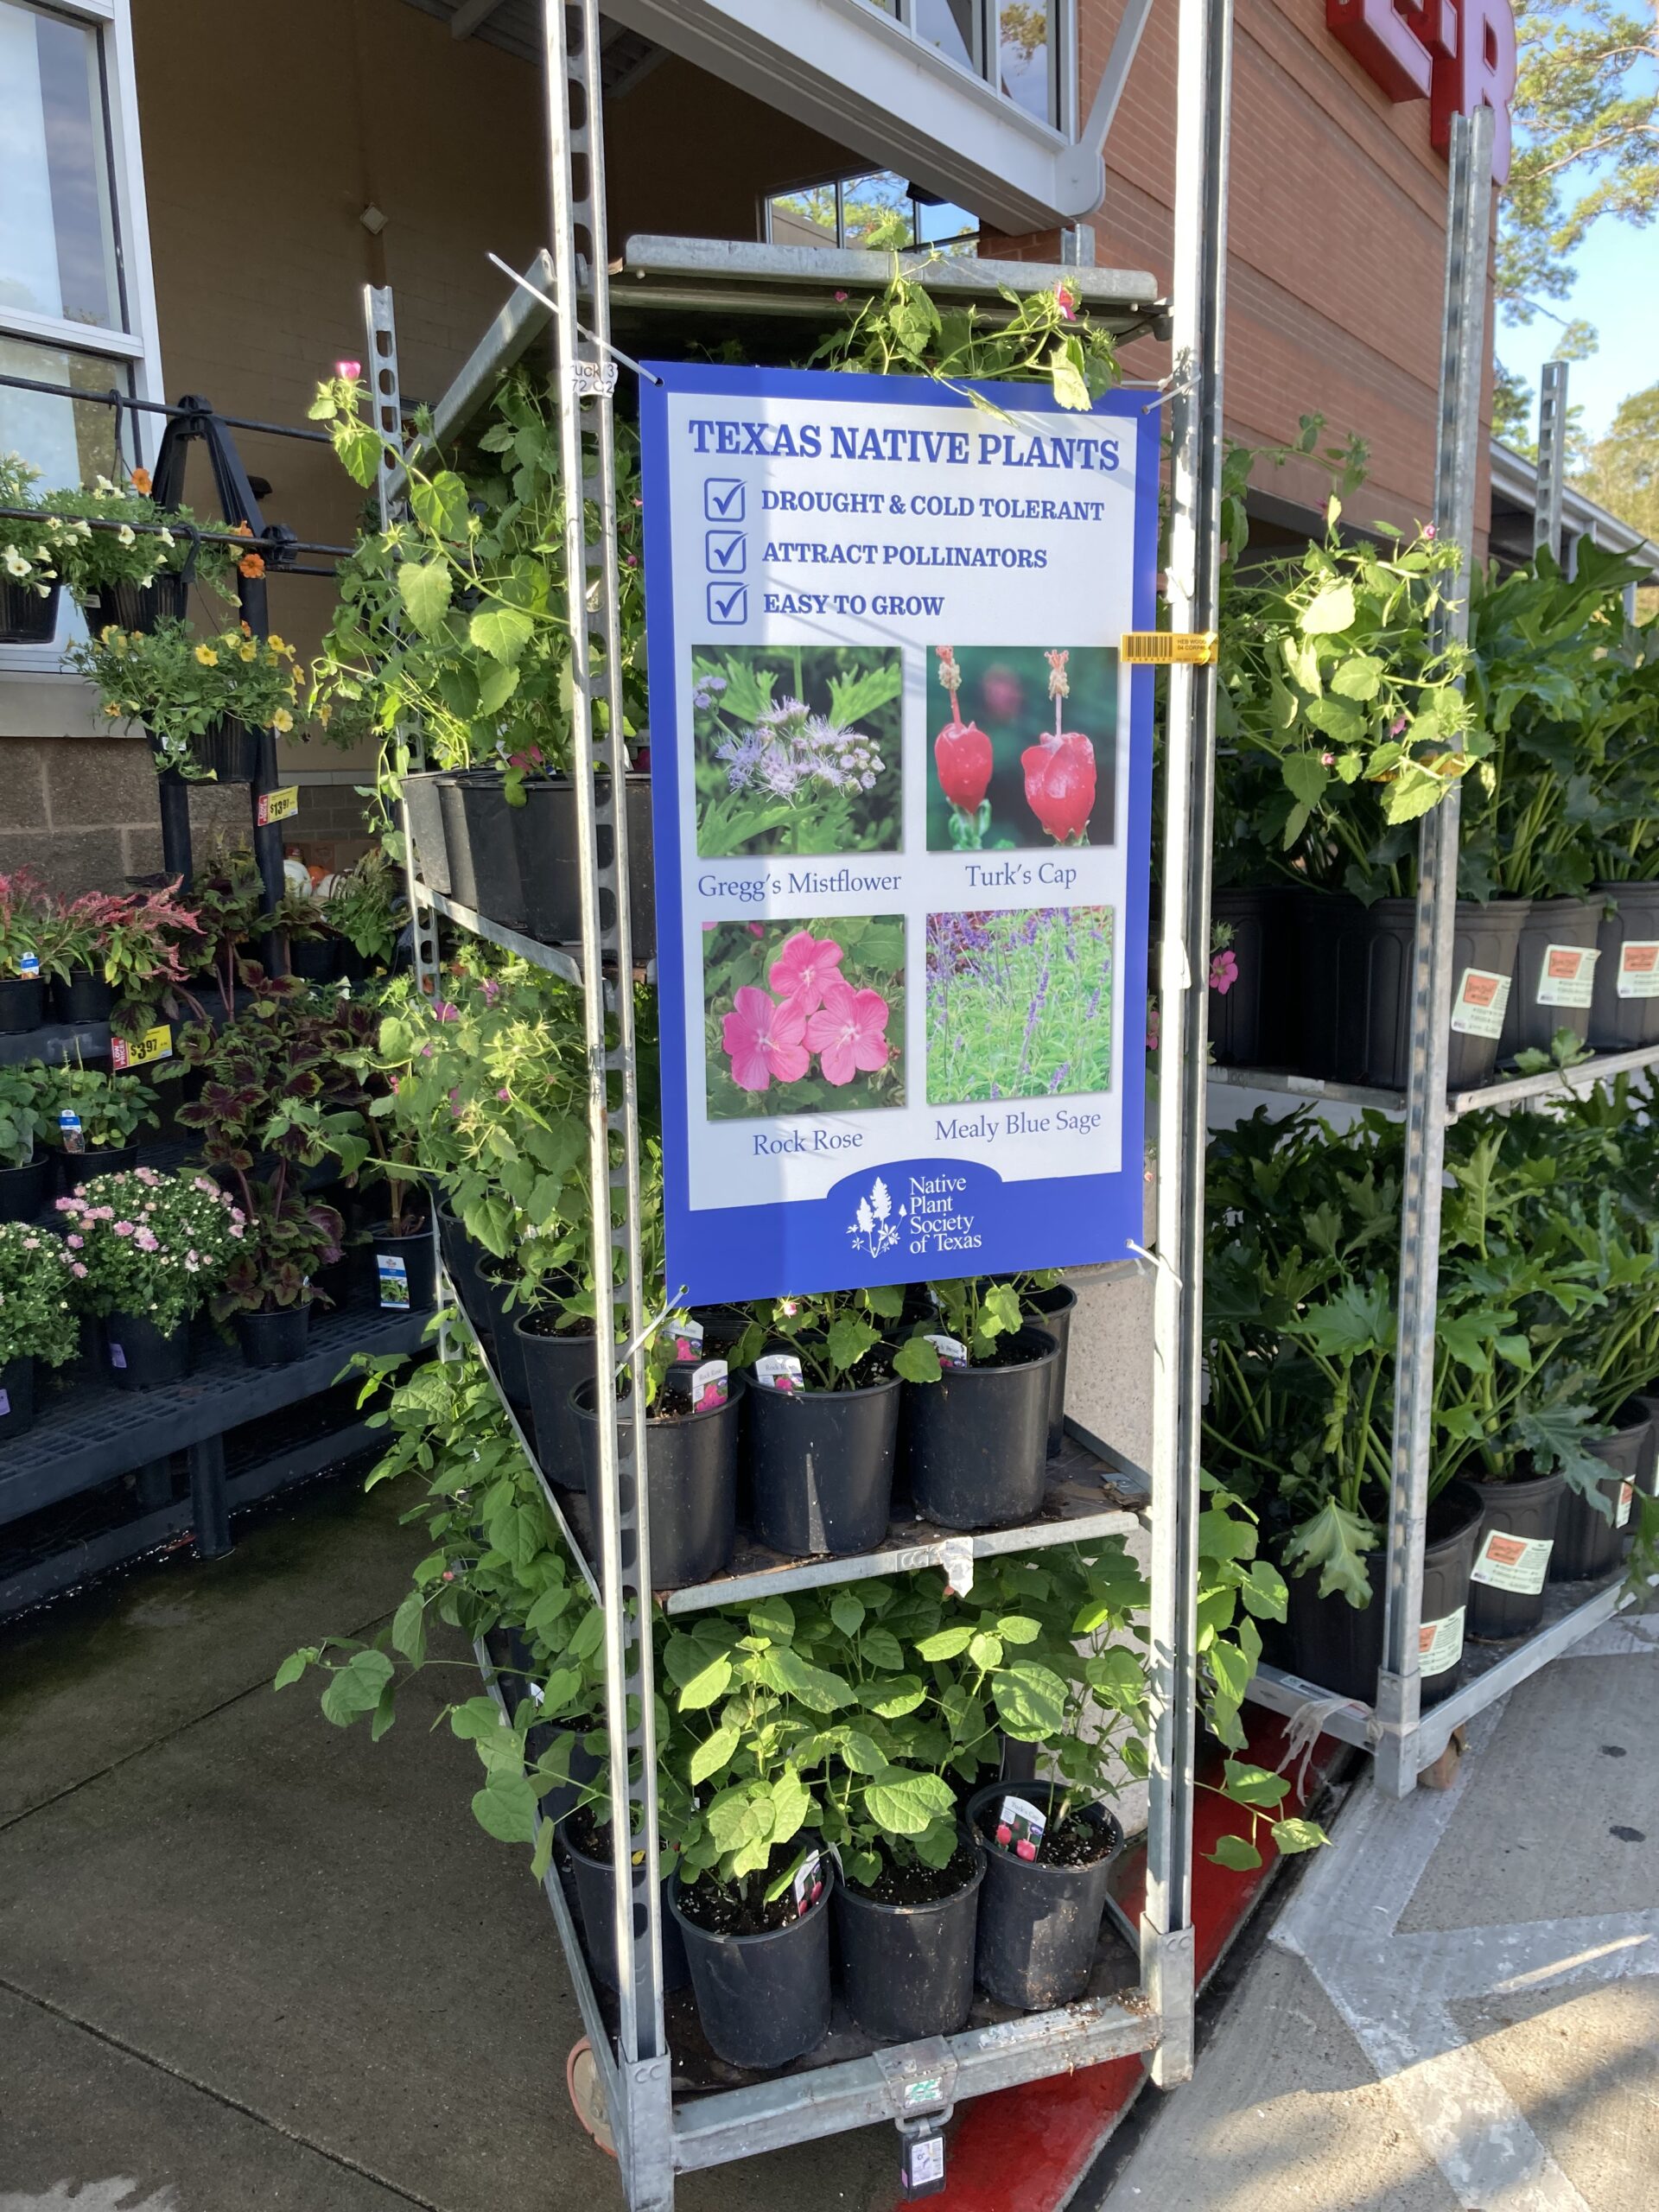 A display outside an HEB grocery store of four Texas native plants: Gregg’s mistflower, Turk’s cap, rock rose and mealy blue sage.